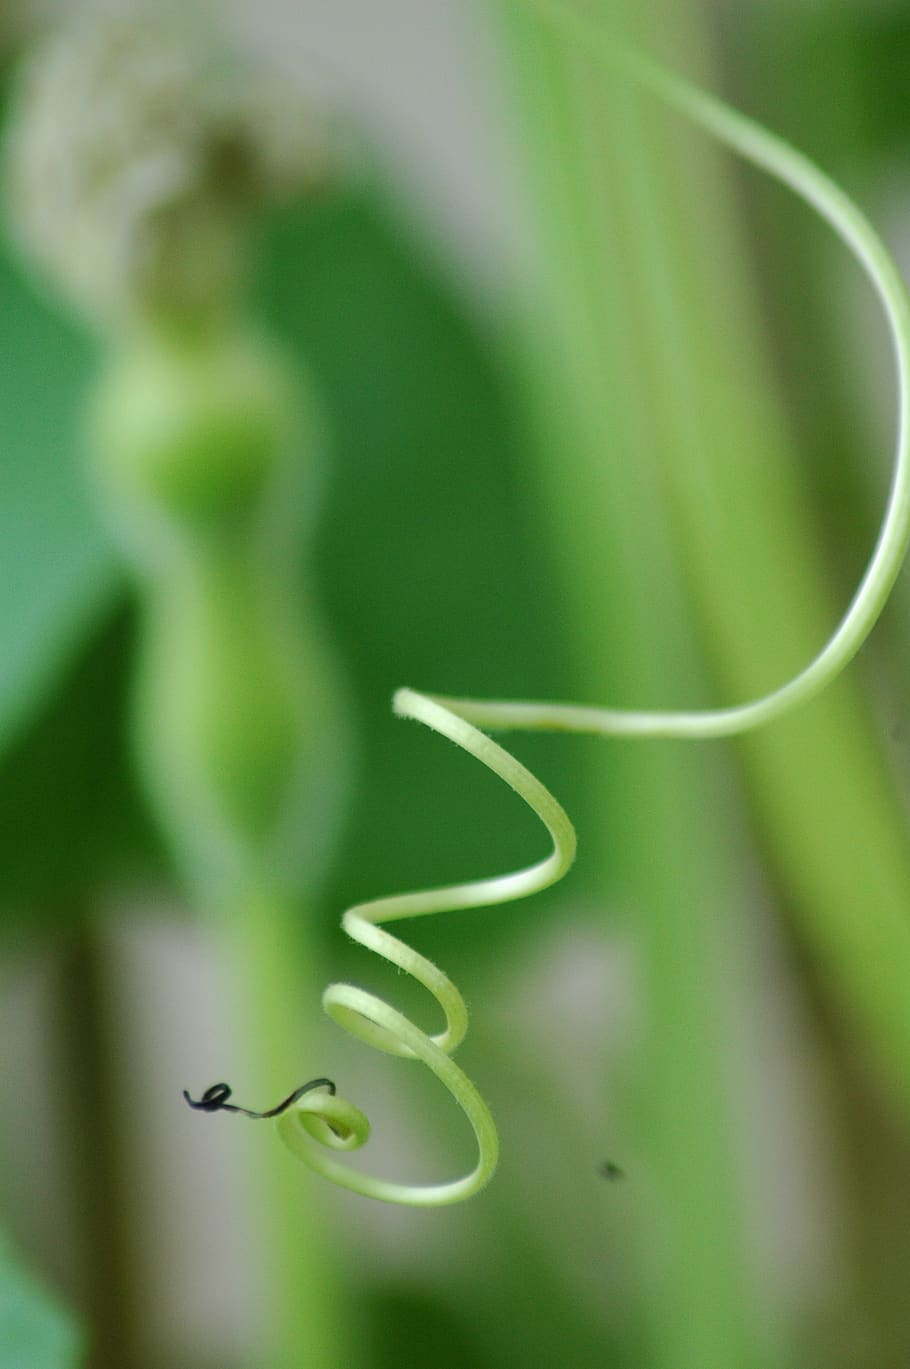 squash gourd, calebasse, green, yard, growth, plant, green color, tendril, beauty in nature, close-up